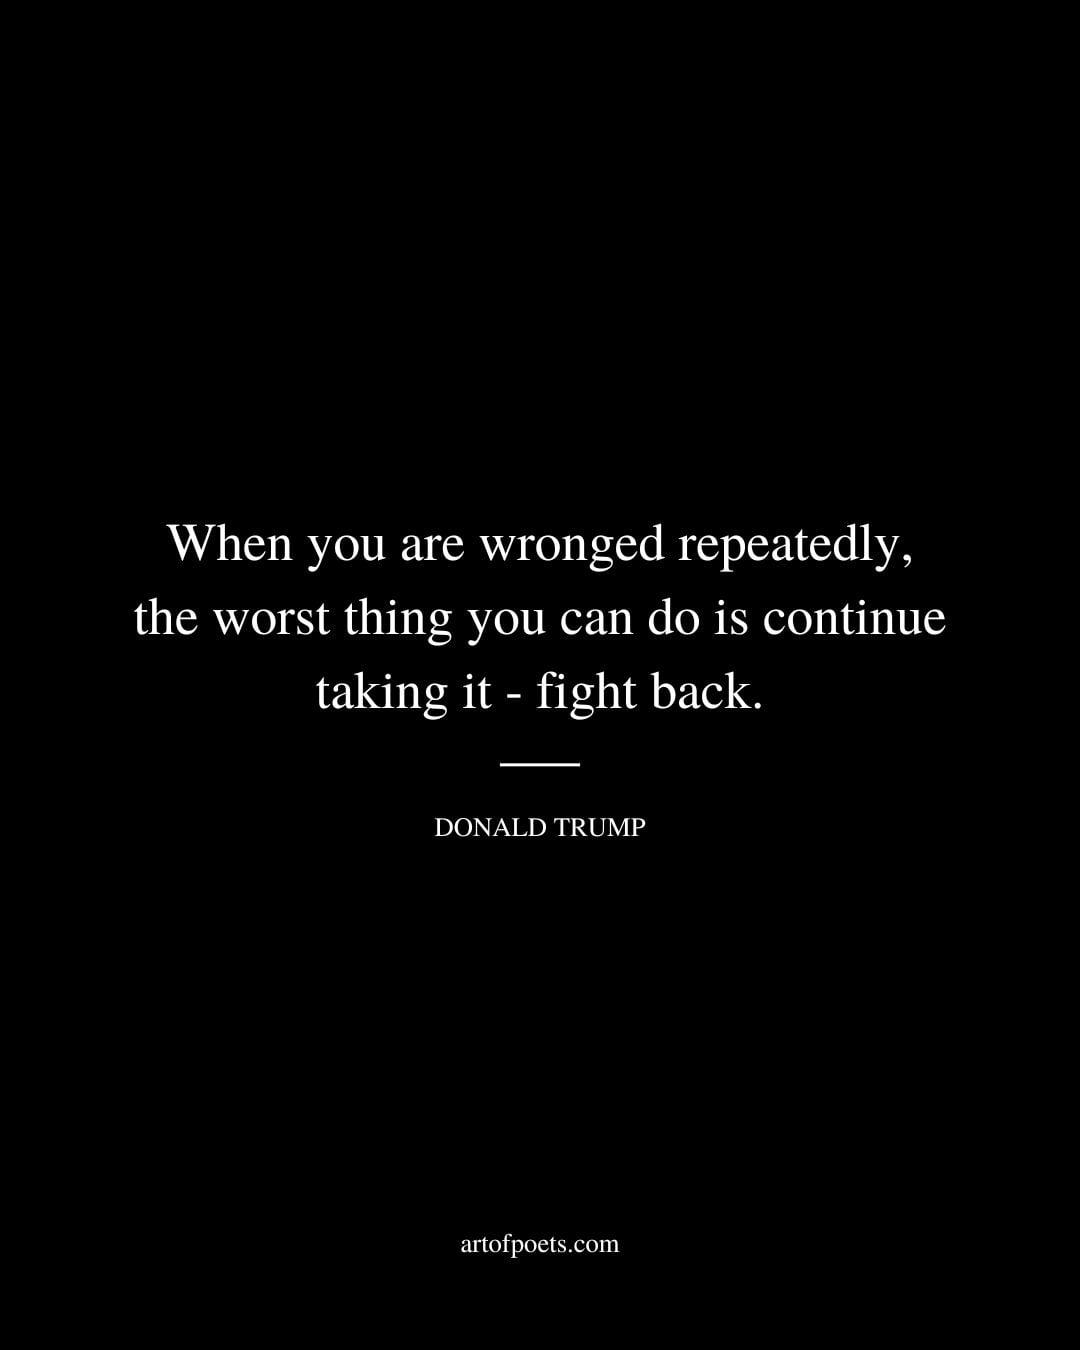 When you are wronged repeatedly the worst thing you can do is continue taking it fight back